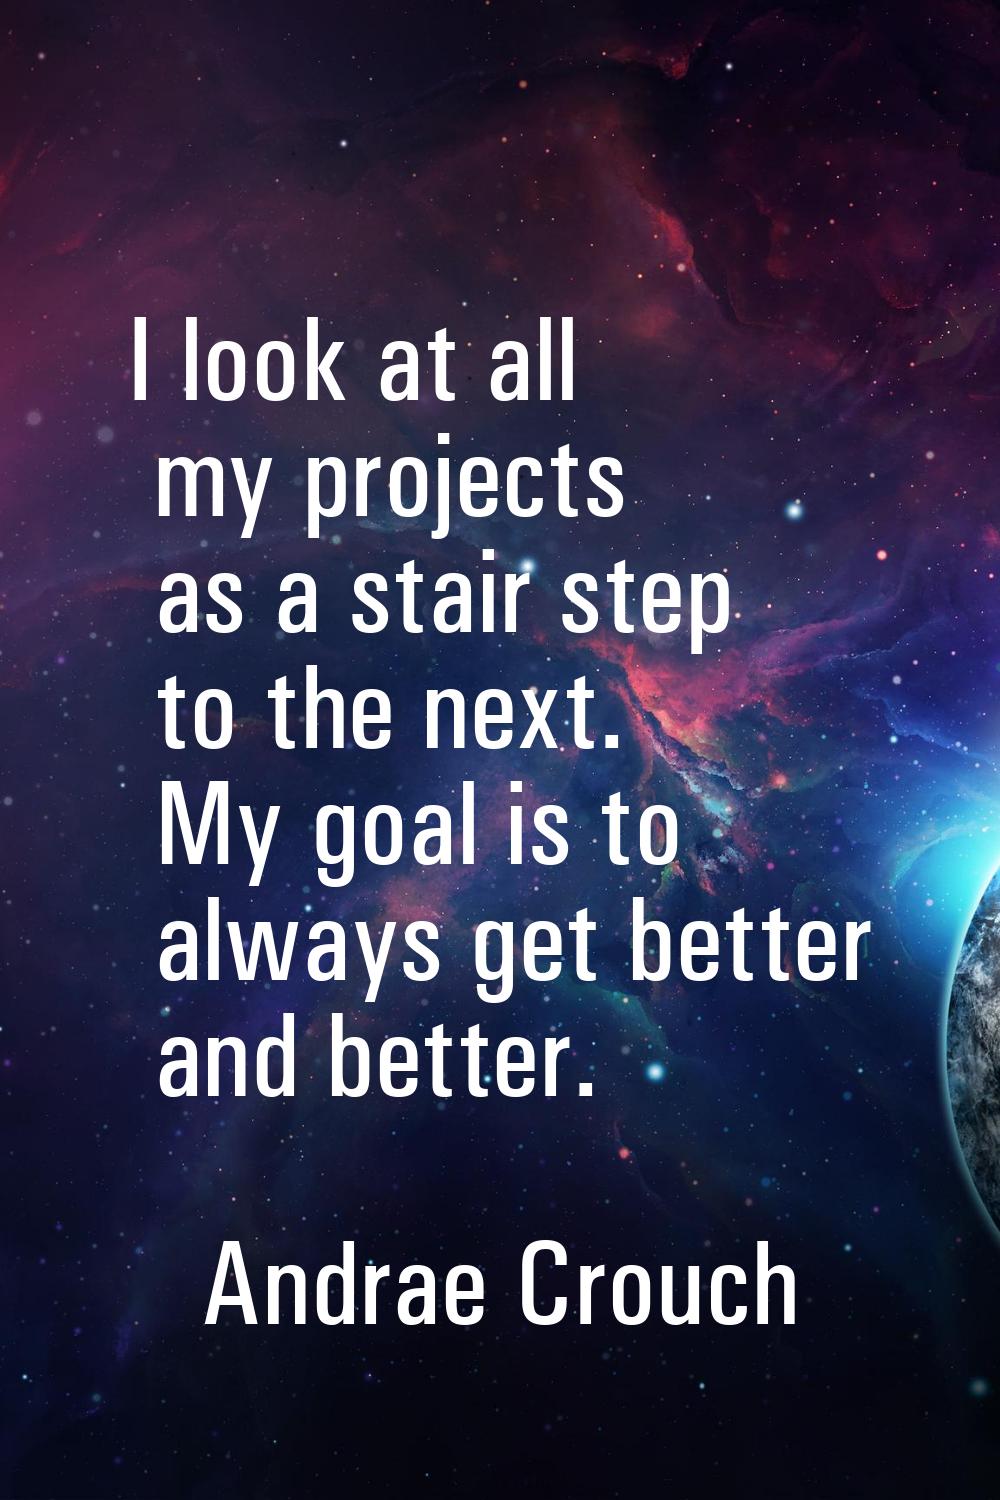 I look at all my projects as a stair step to the next. My goal is to always get better and better.